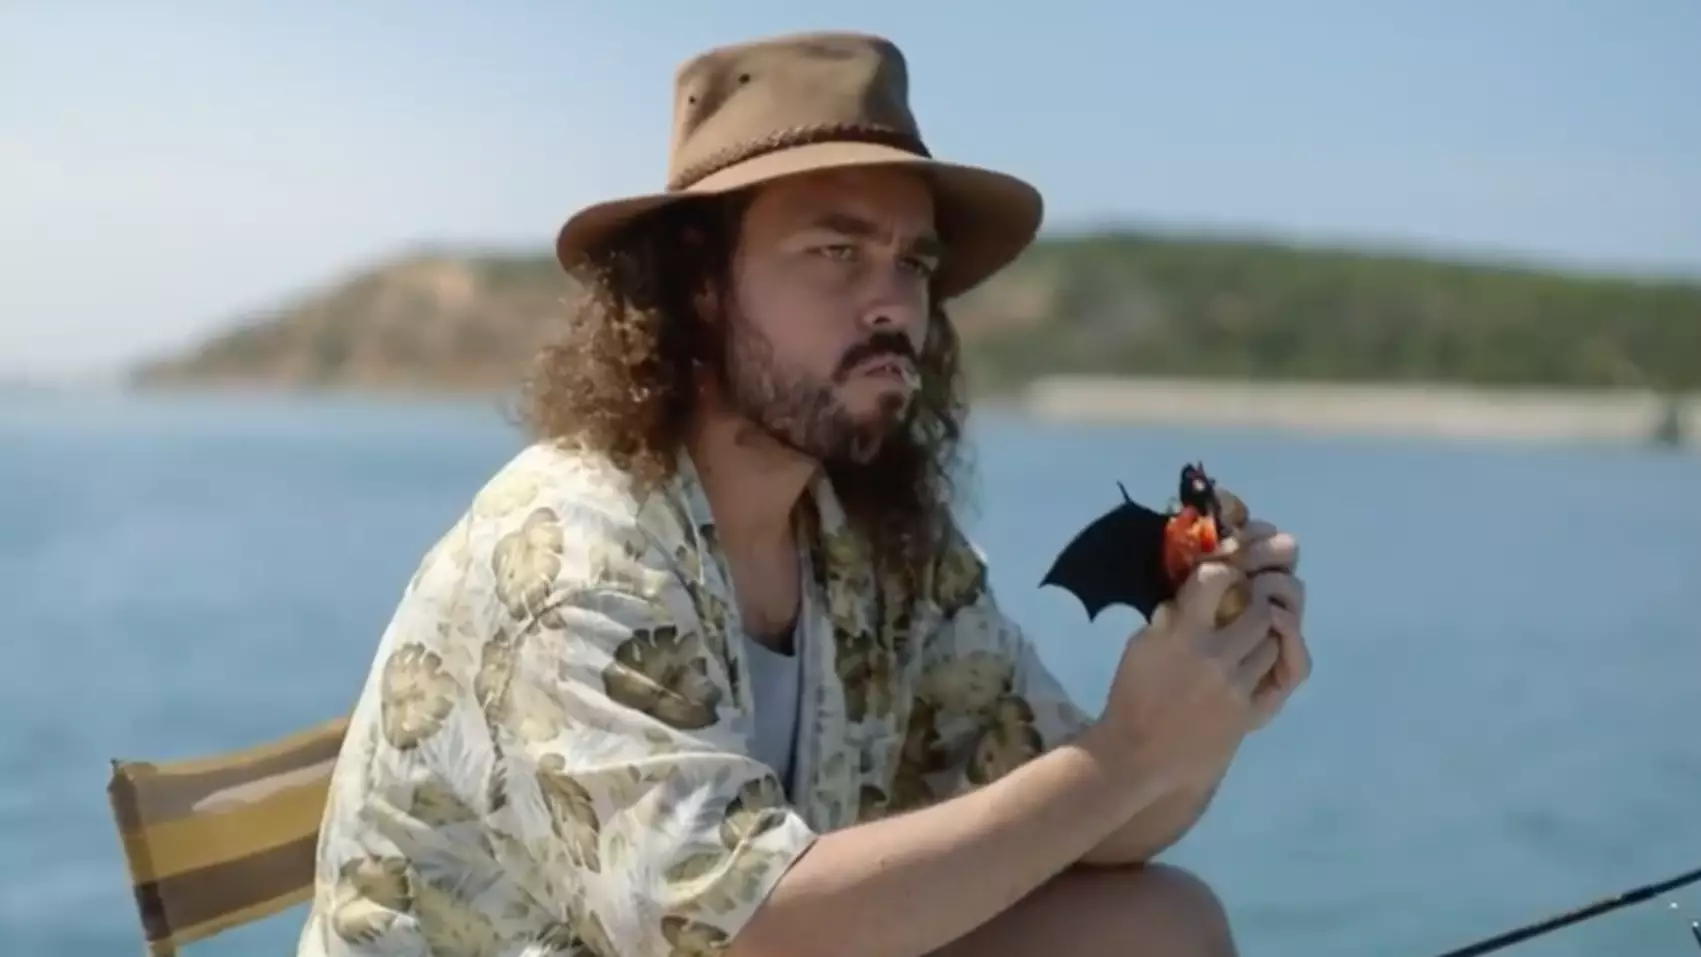 Aussie Retailer BCF Criticised Over New Ad Showing Man Eating A Bat